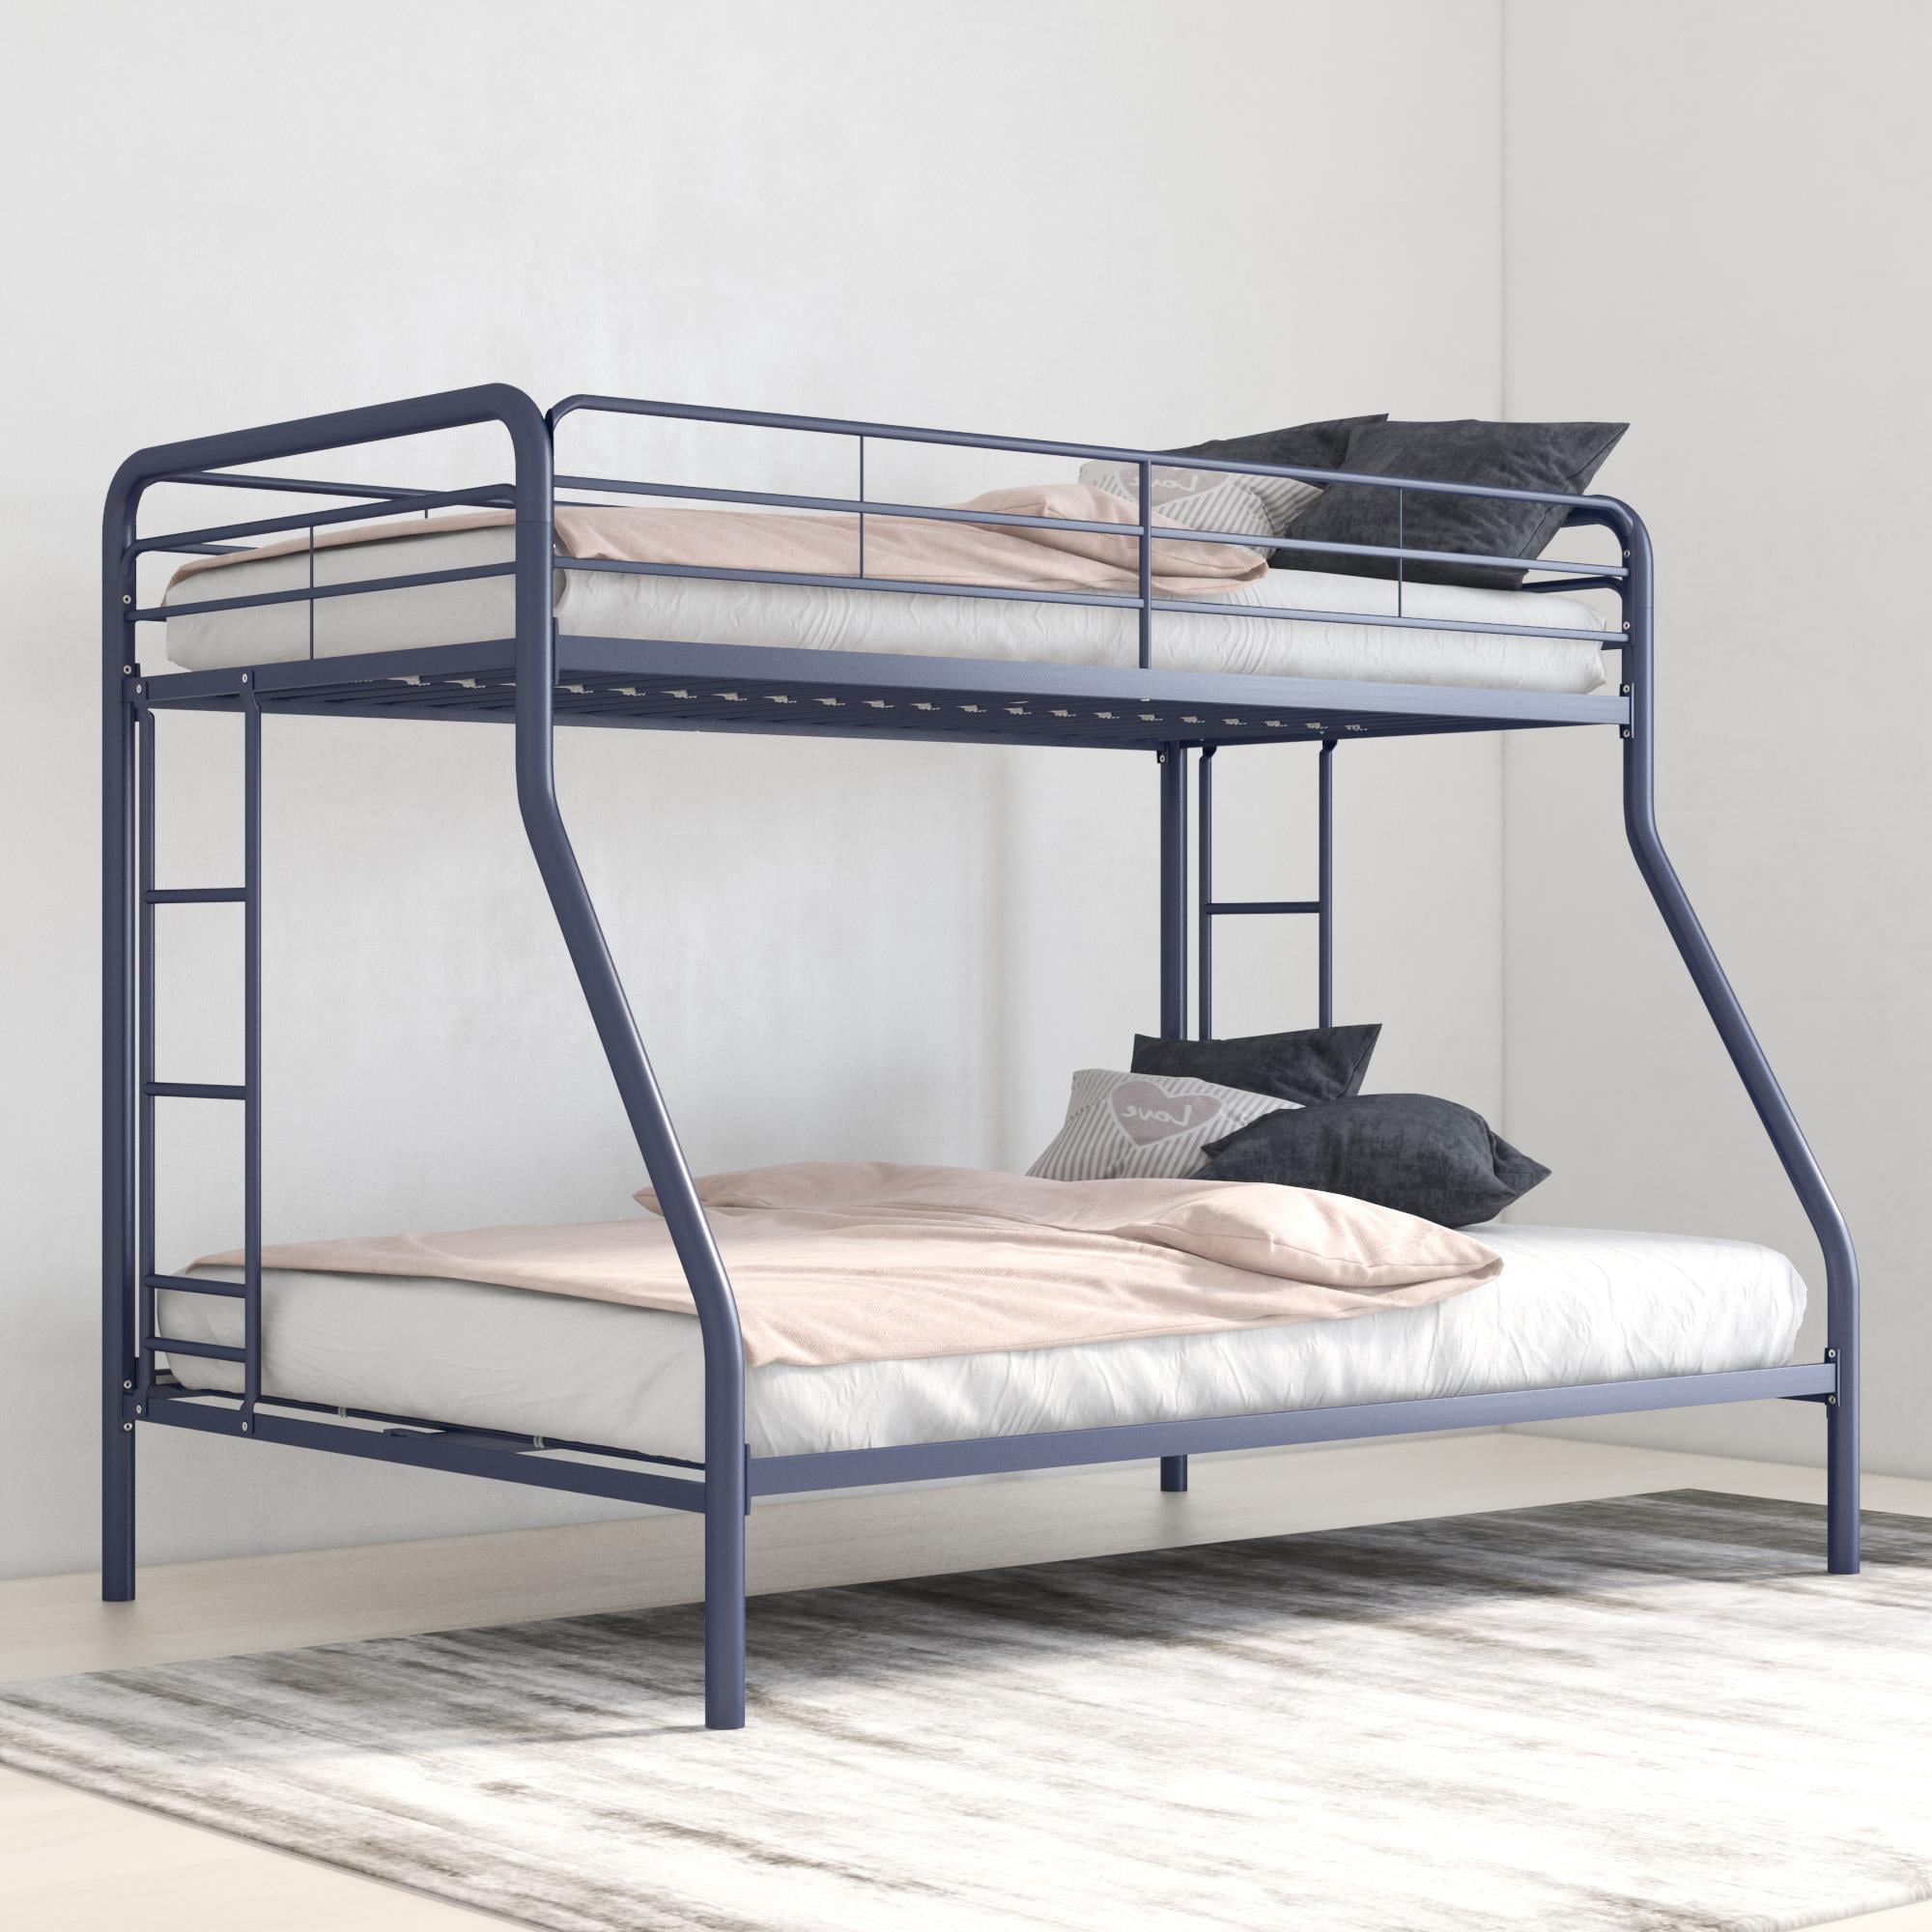 Dhp Twin Over Full Metal Bunk Bed Frame, Bunk Bed Metal Pins